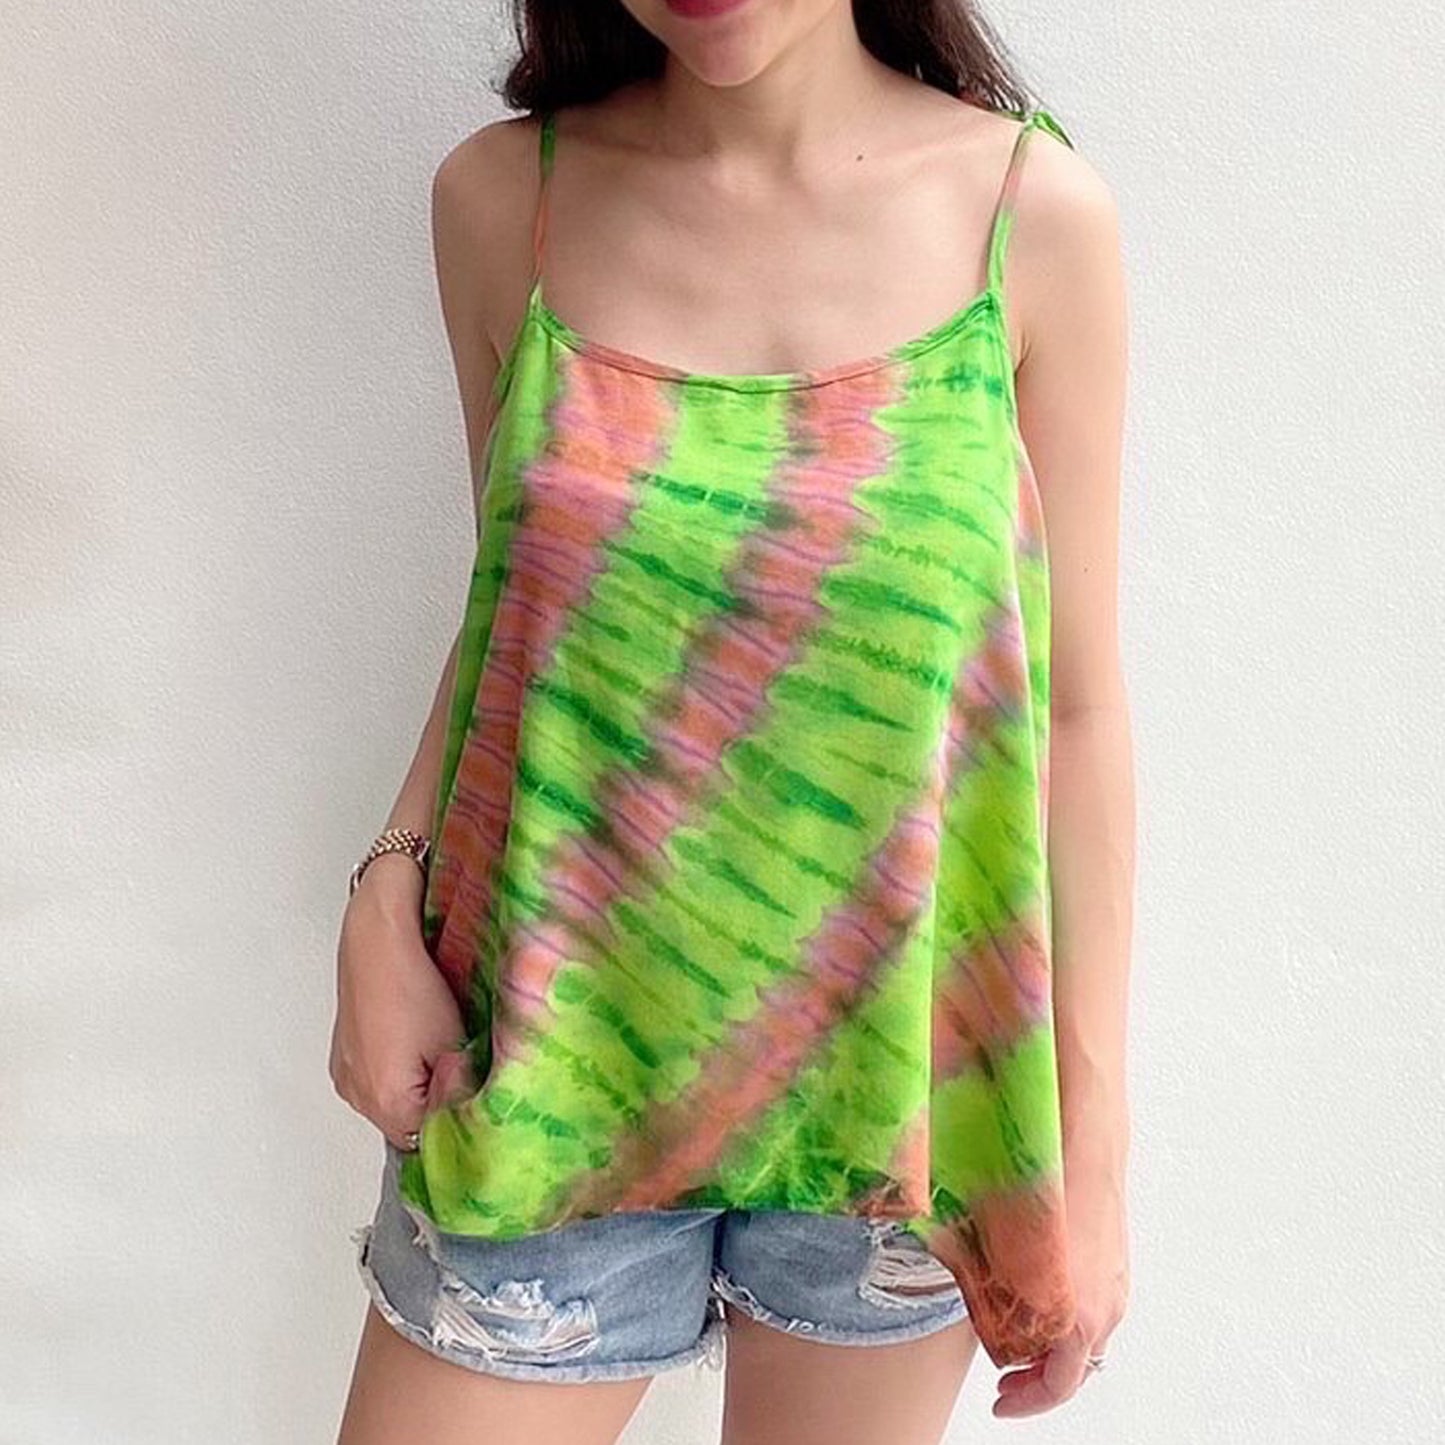 Cami Camisole Teen & Women, One Size Free Size Fit 0 to 8, Handmade Tie Dyed - Green Jade